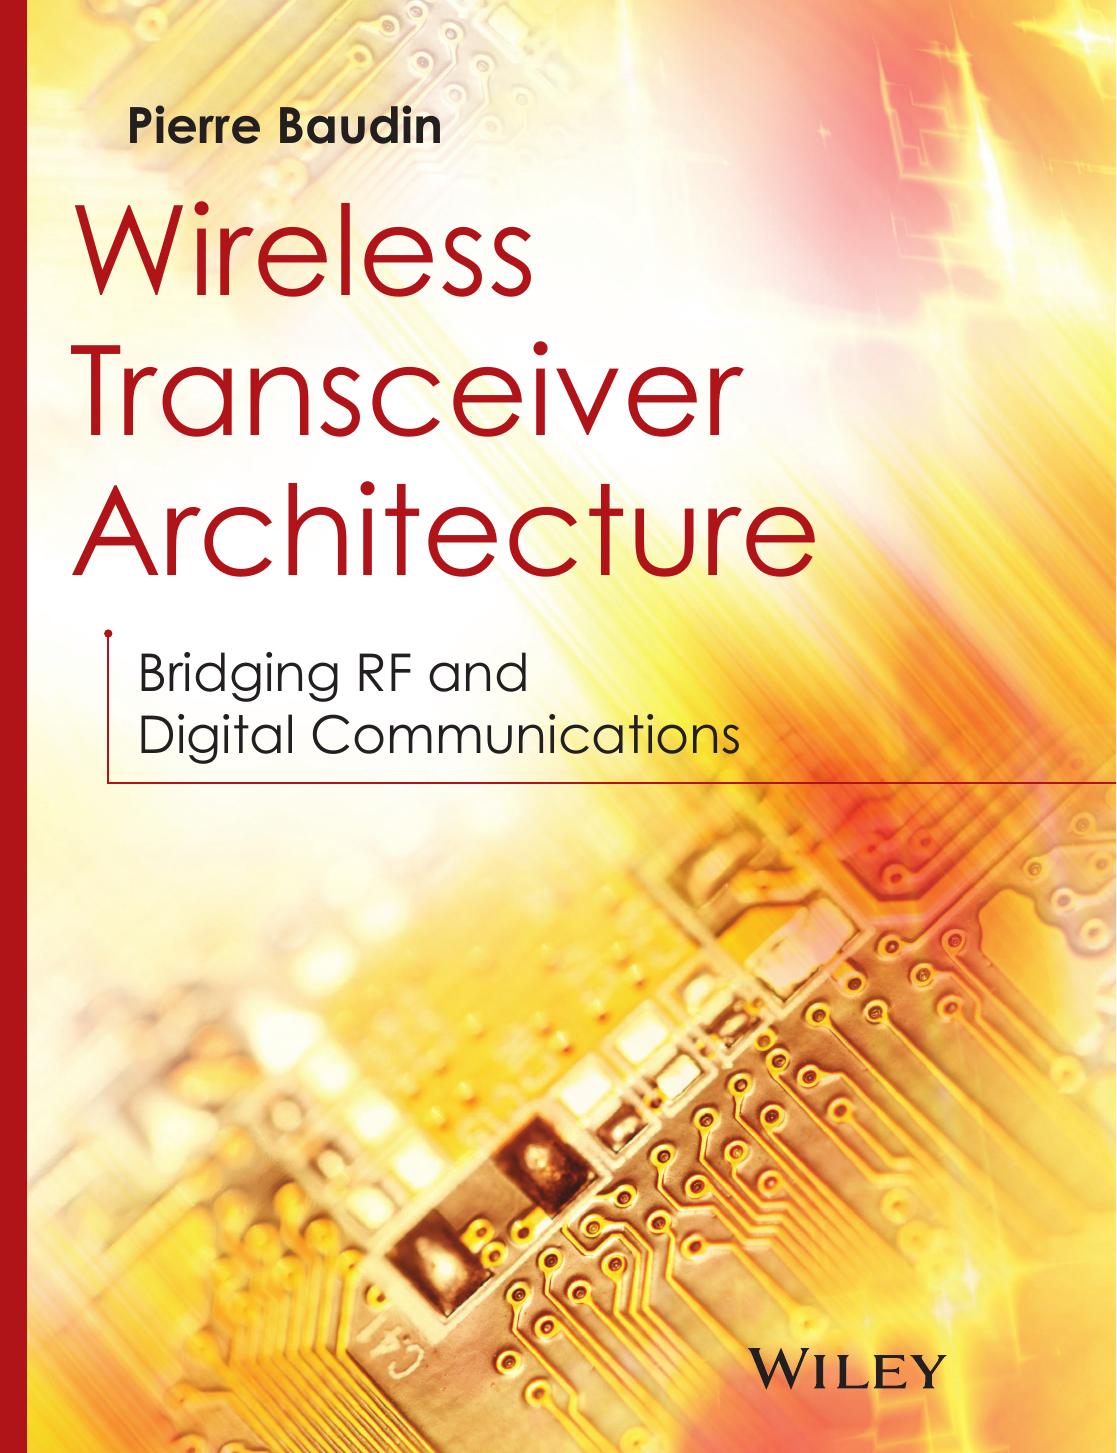 Wireless Transceiver Architecture by Pierre Baudin